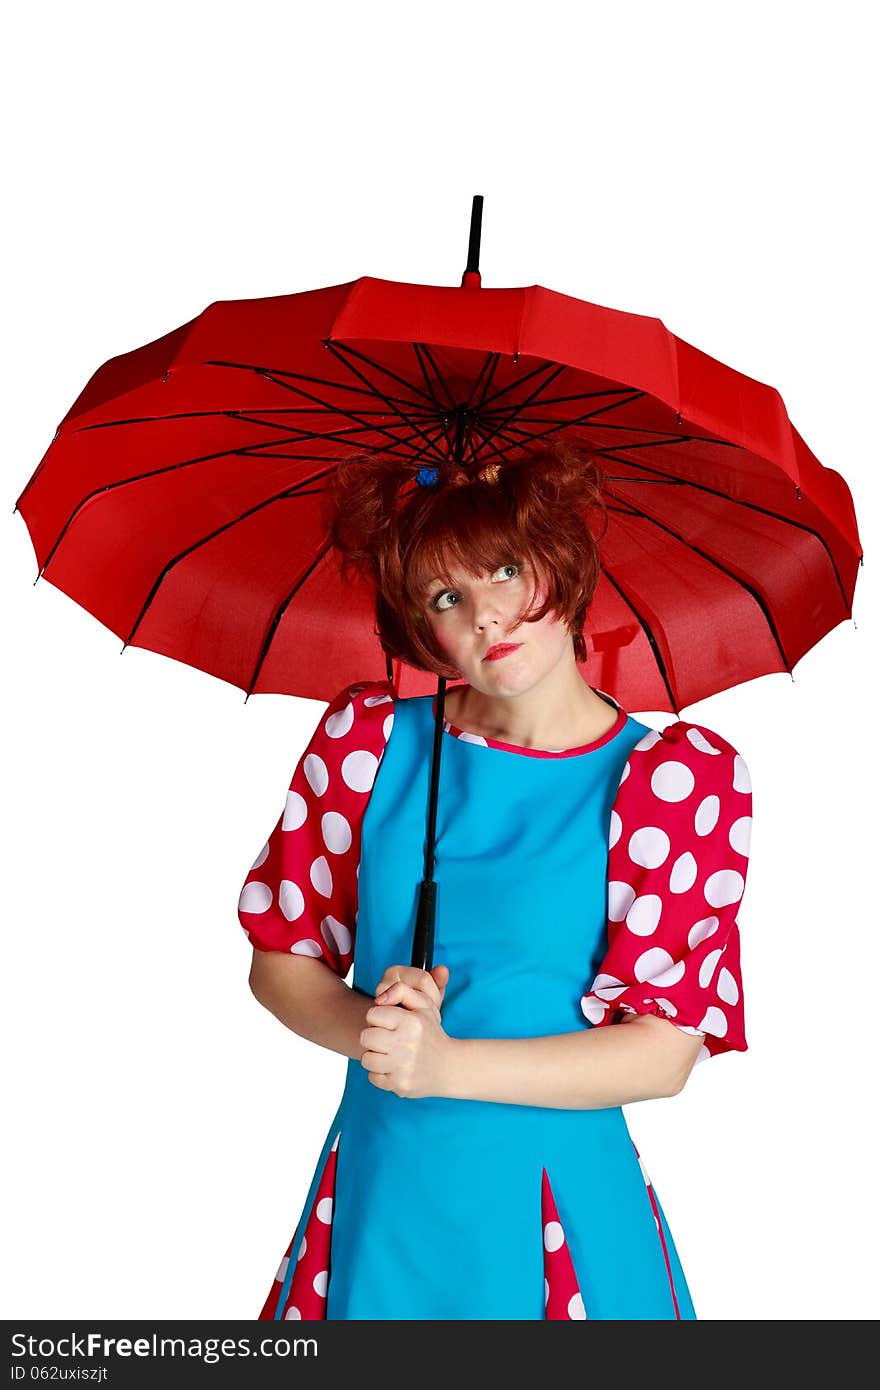 Sad young woman with a red umbrella on a white background isolated